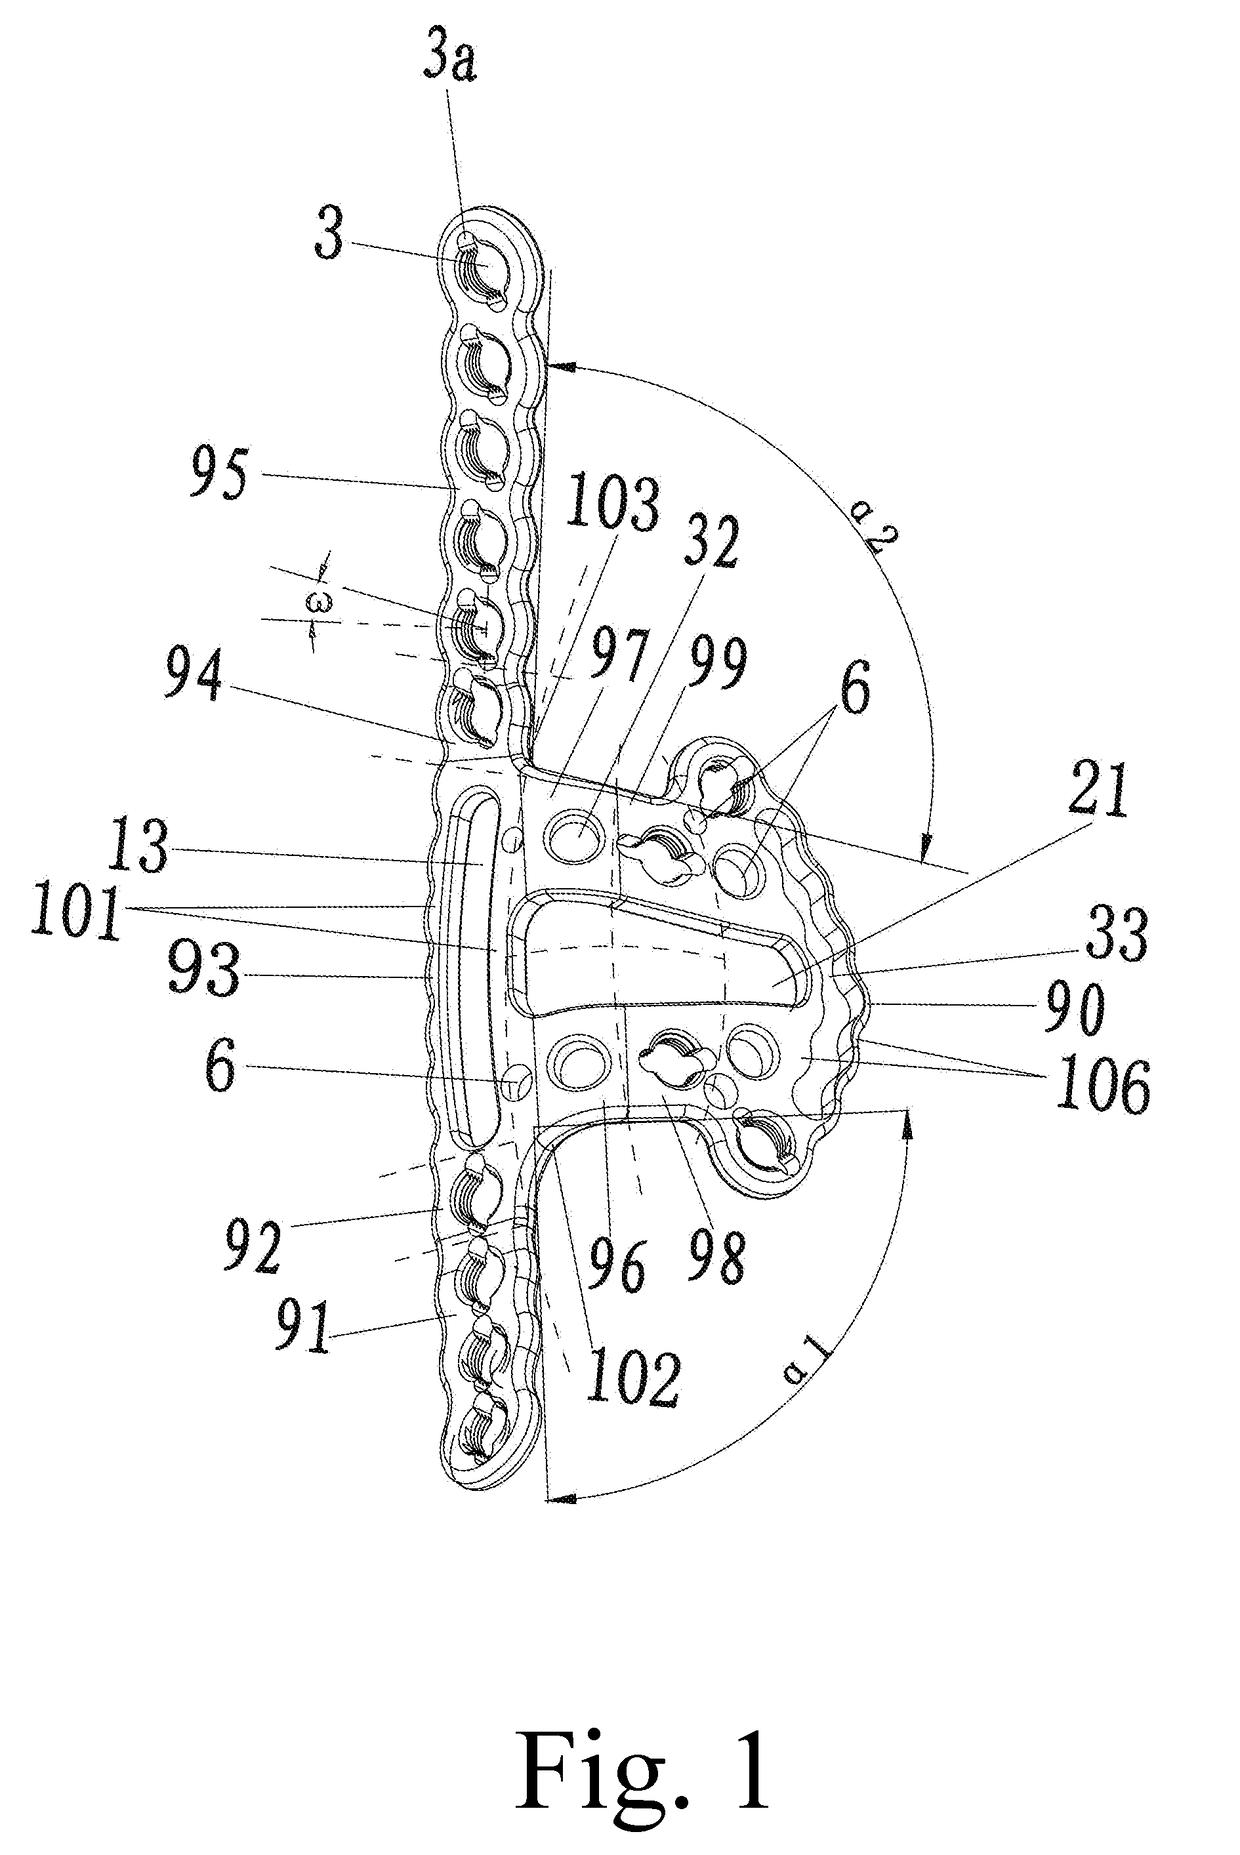 General anatomic self-locking plate for medial acetabulum and auxiliary apparatus thereof